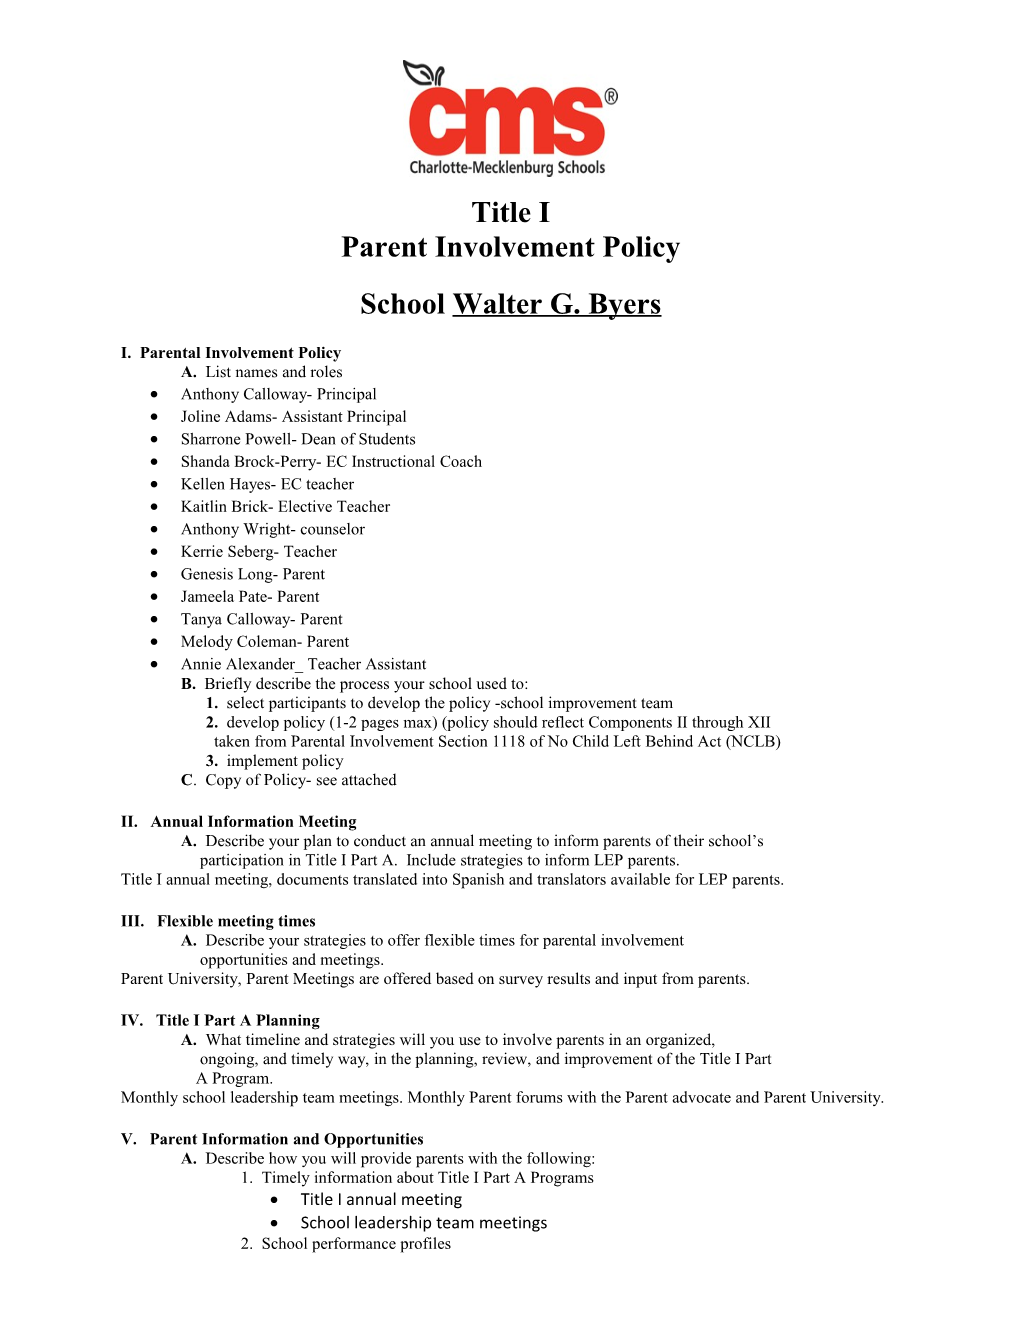 Title I Parent Involvement Policy Template